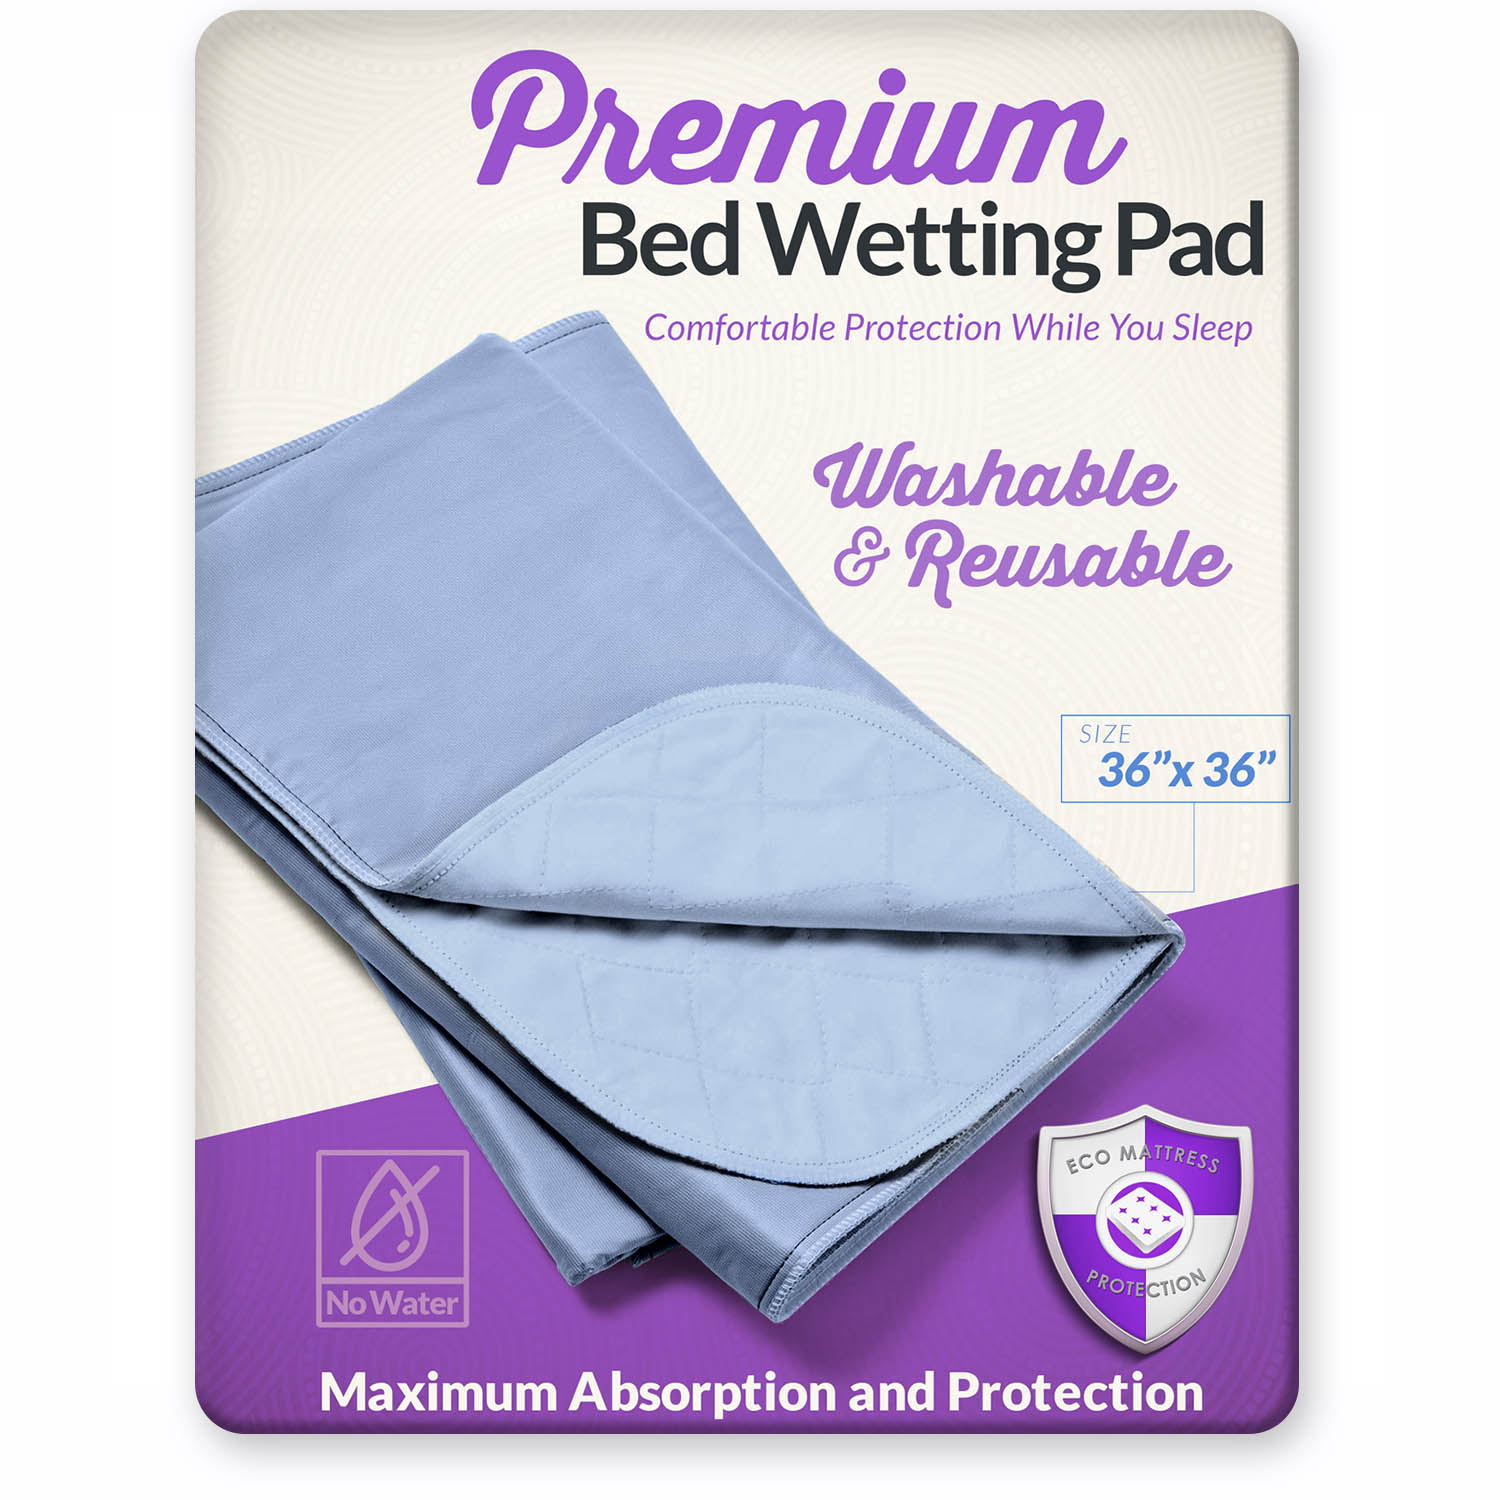 Travelwant Baby Waterproof Bed Pad Bed Wetting Pads Washable for Kids Toddler Potty Training Pads Baby Wateproof Pad Mat for Pack N Play/Crib/Mini